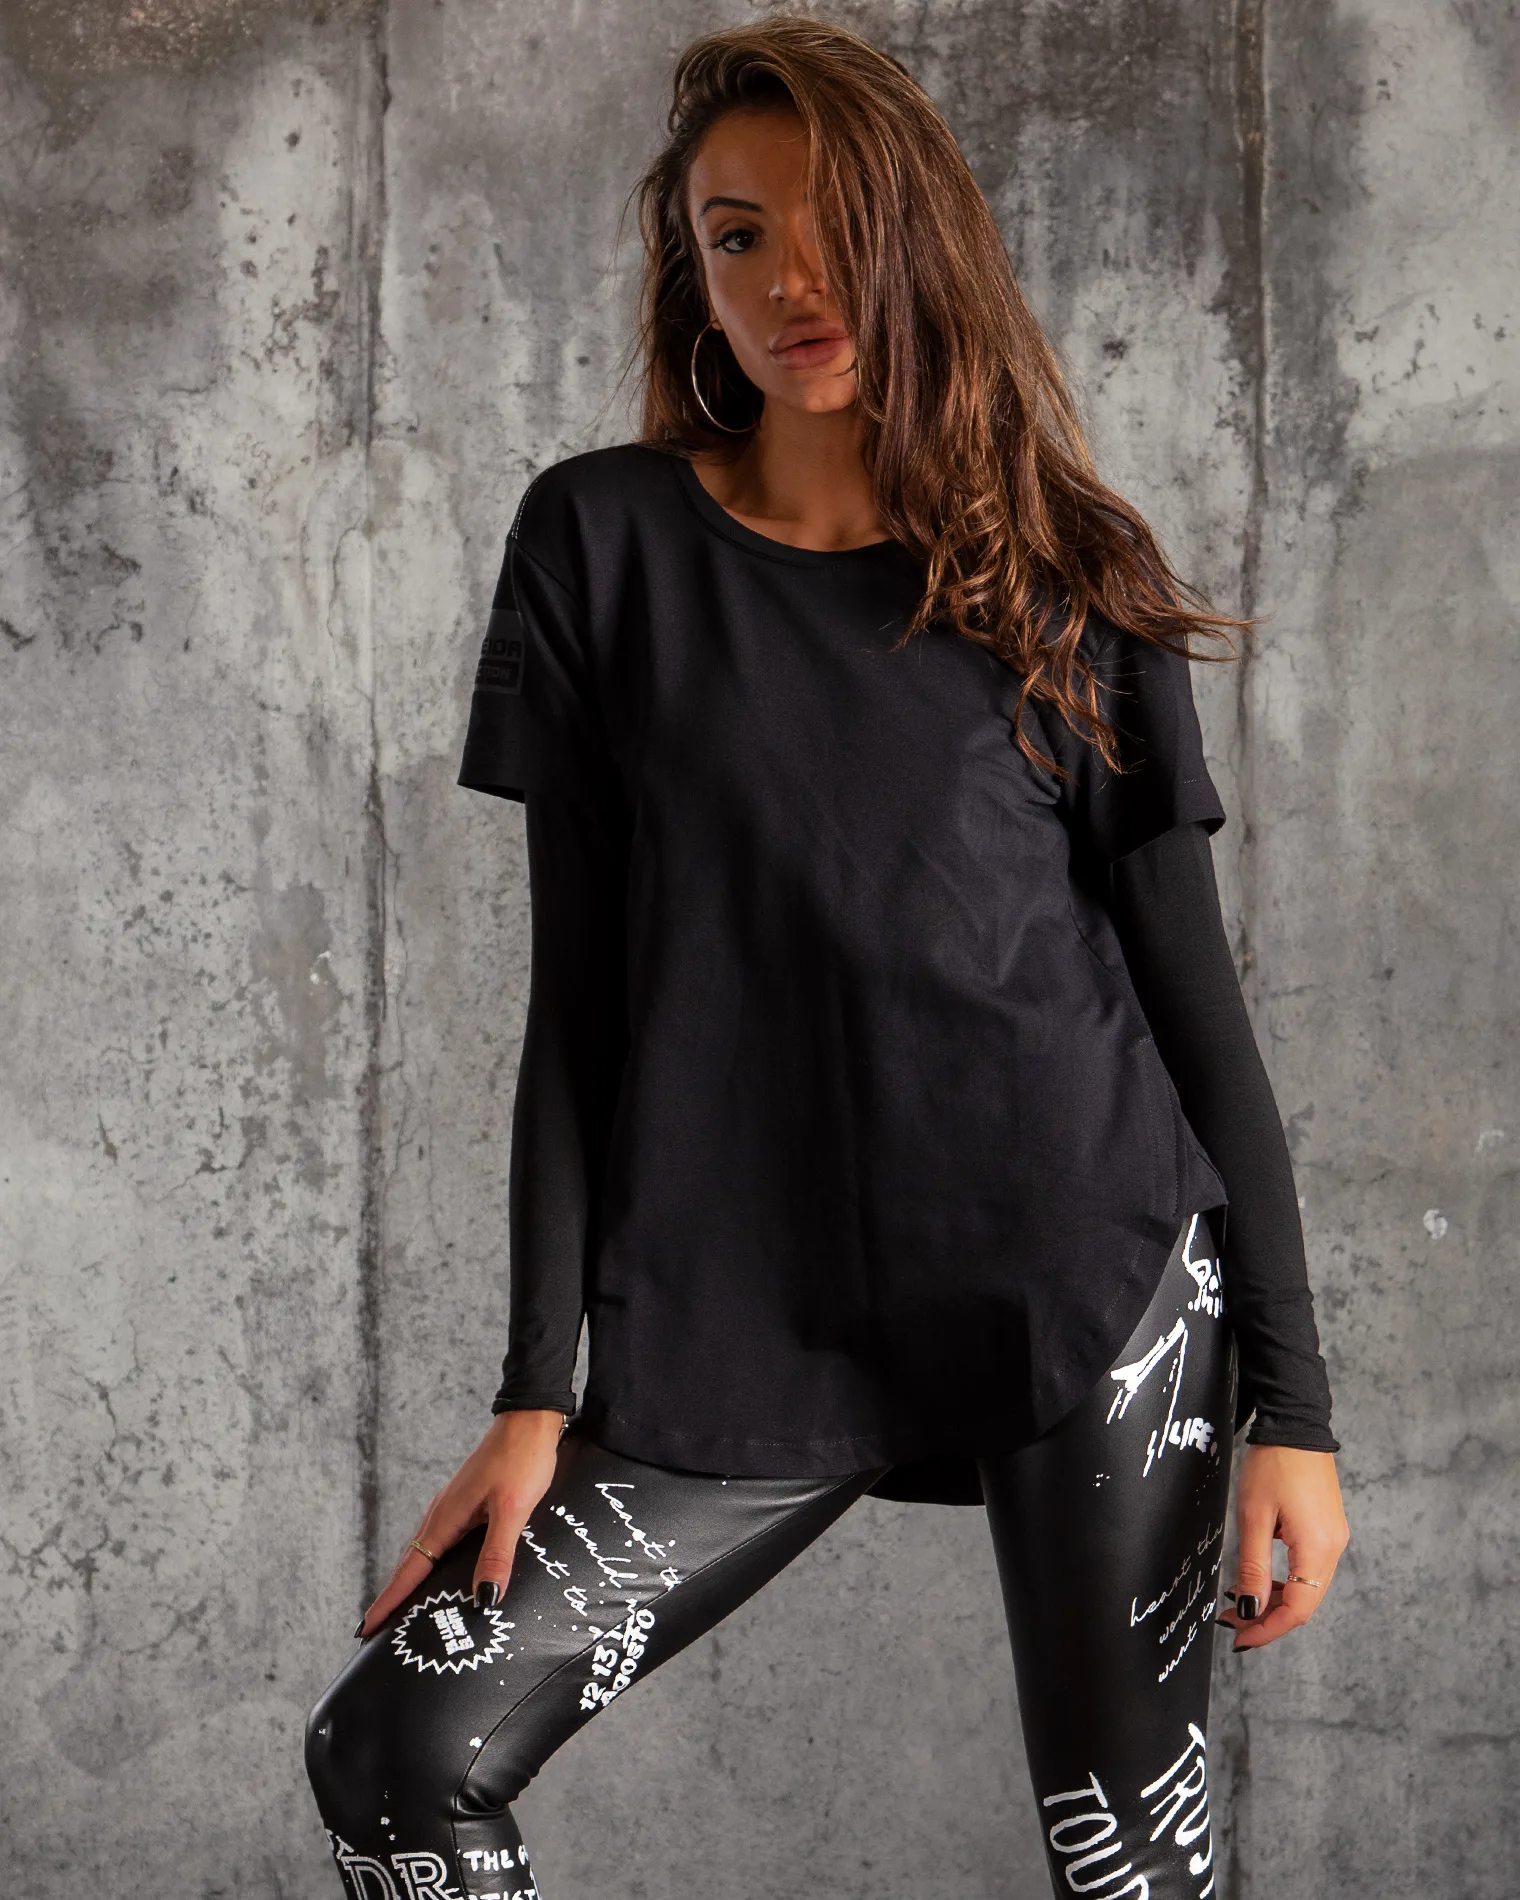 Volume Layered Top, Black Color